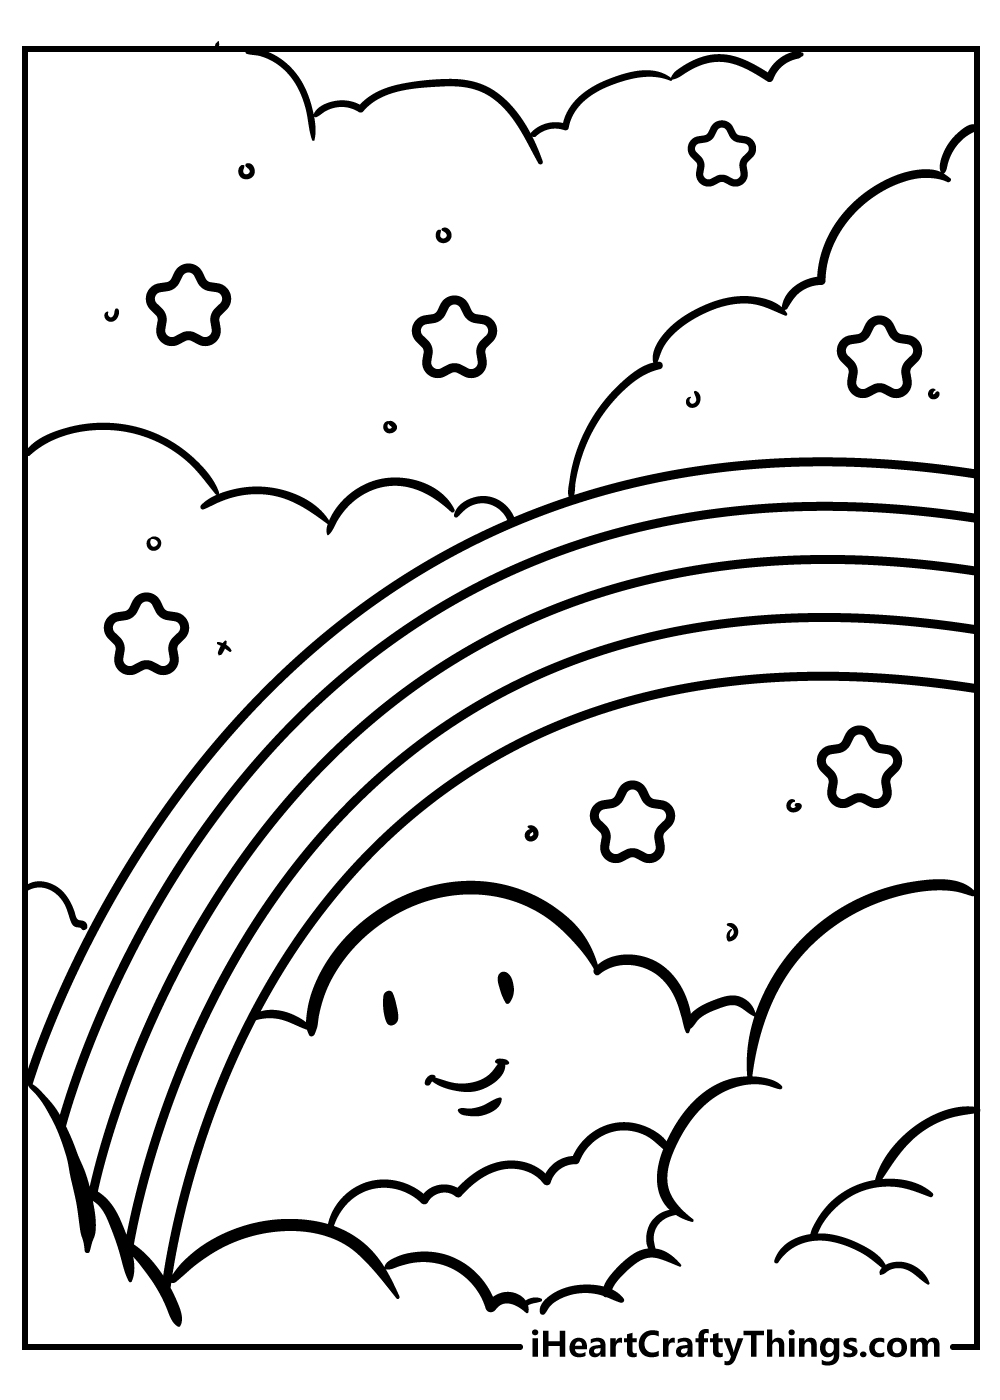 Rainbow Coloring Pages | Kids Coloring Pages